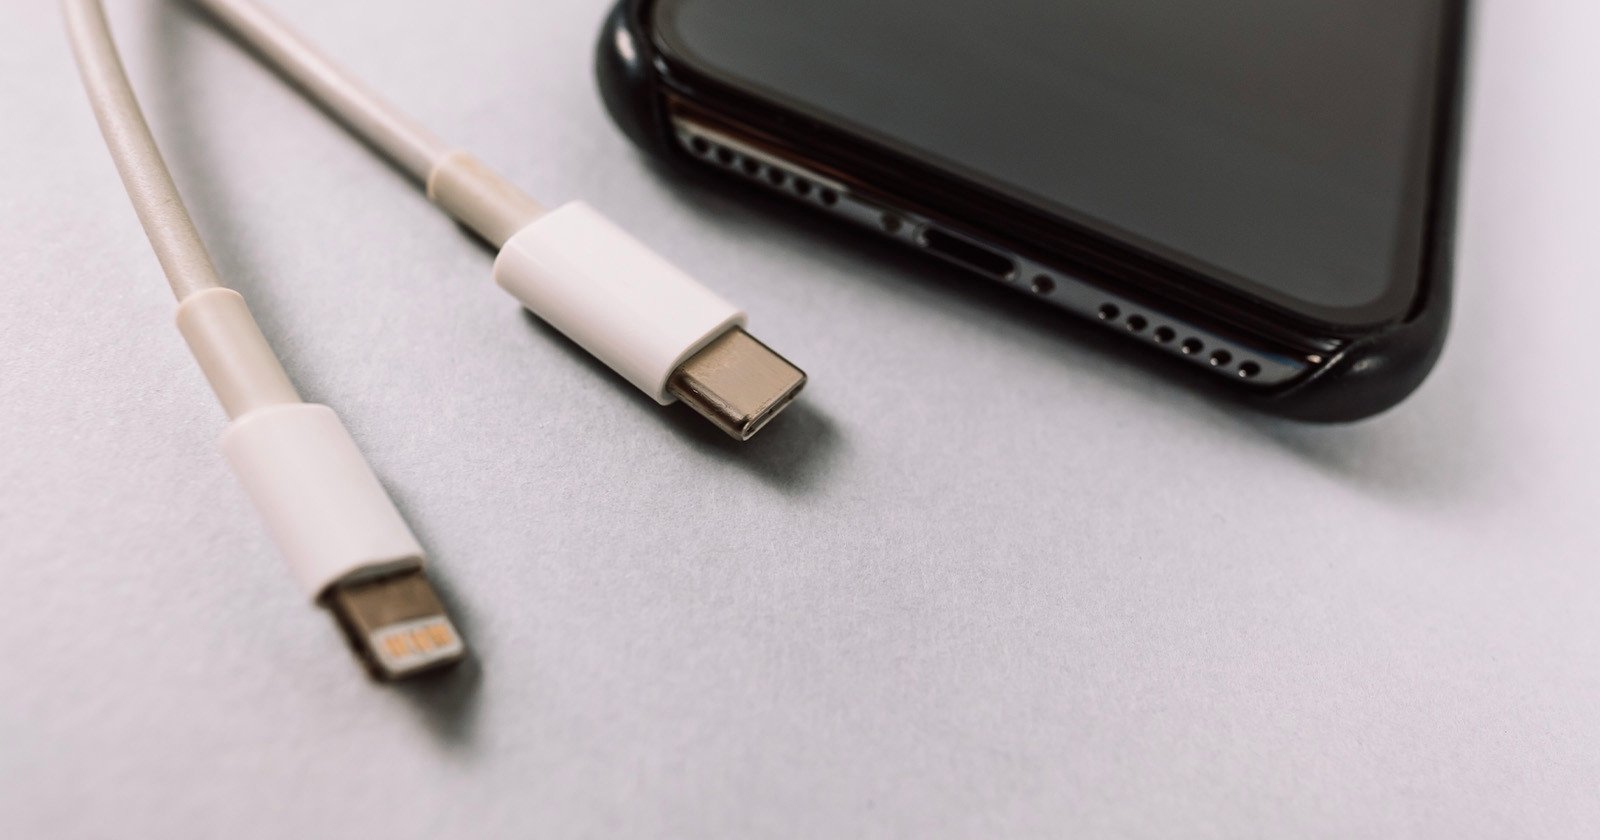 EU Gives Final Approval to Law that Will Force Apple to Use USB-C